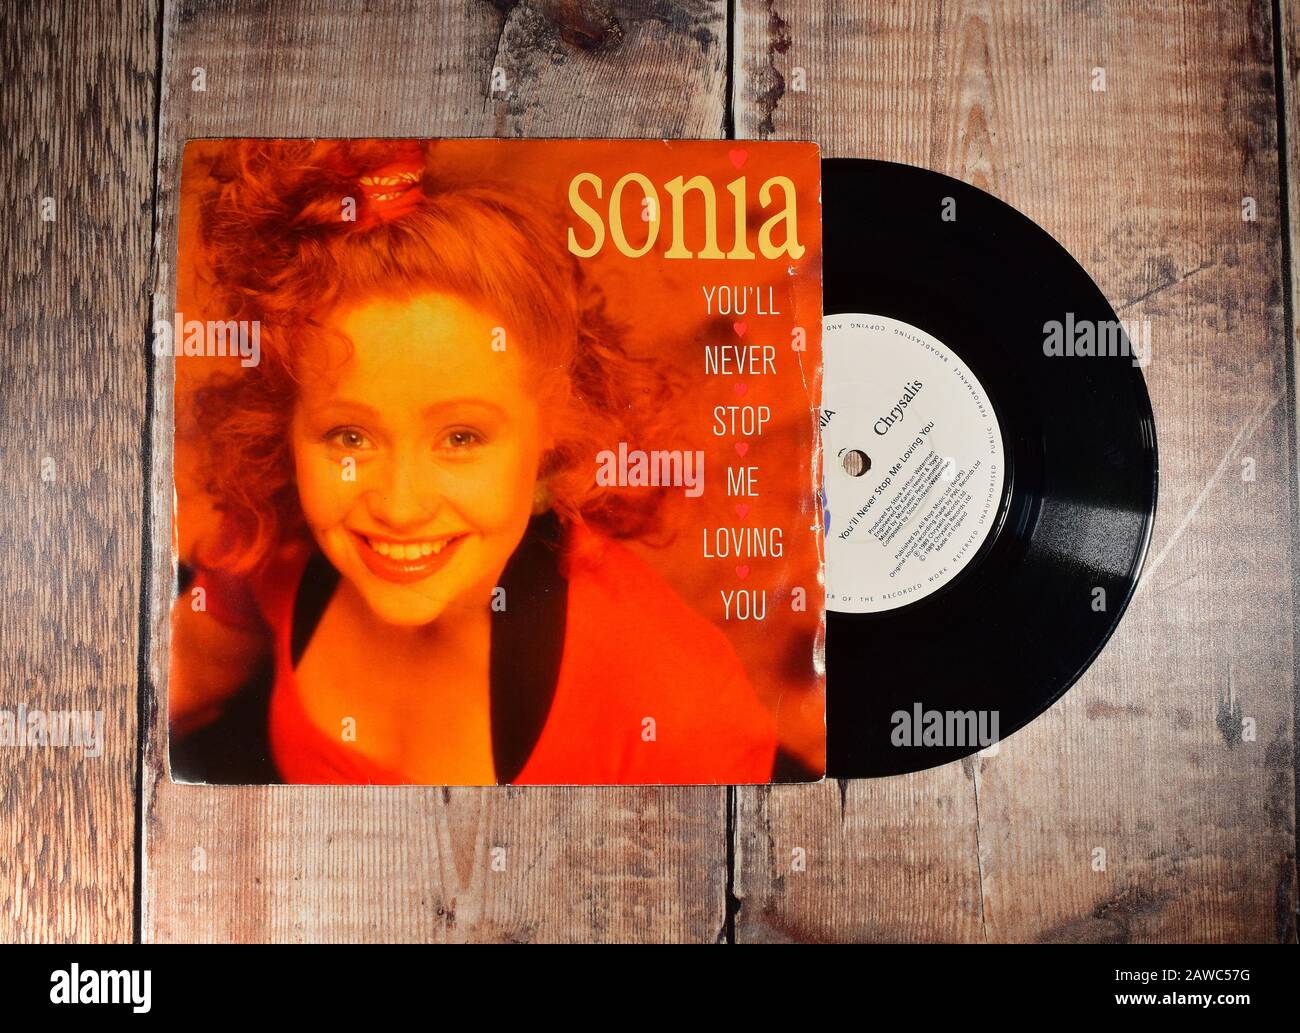 Sonia - you'll never stop me loving you - 7 inch single Stock Photo - Alamy